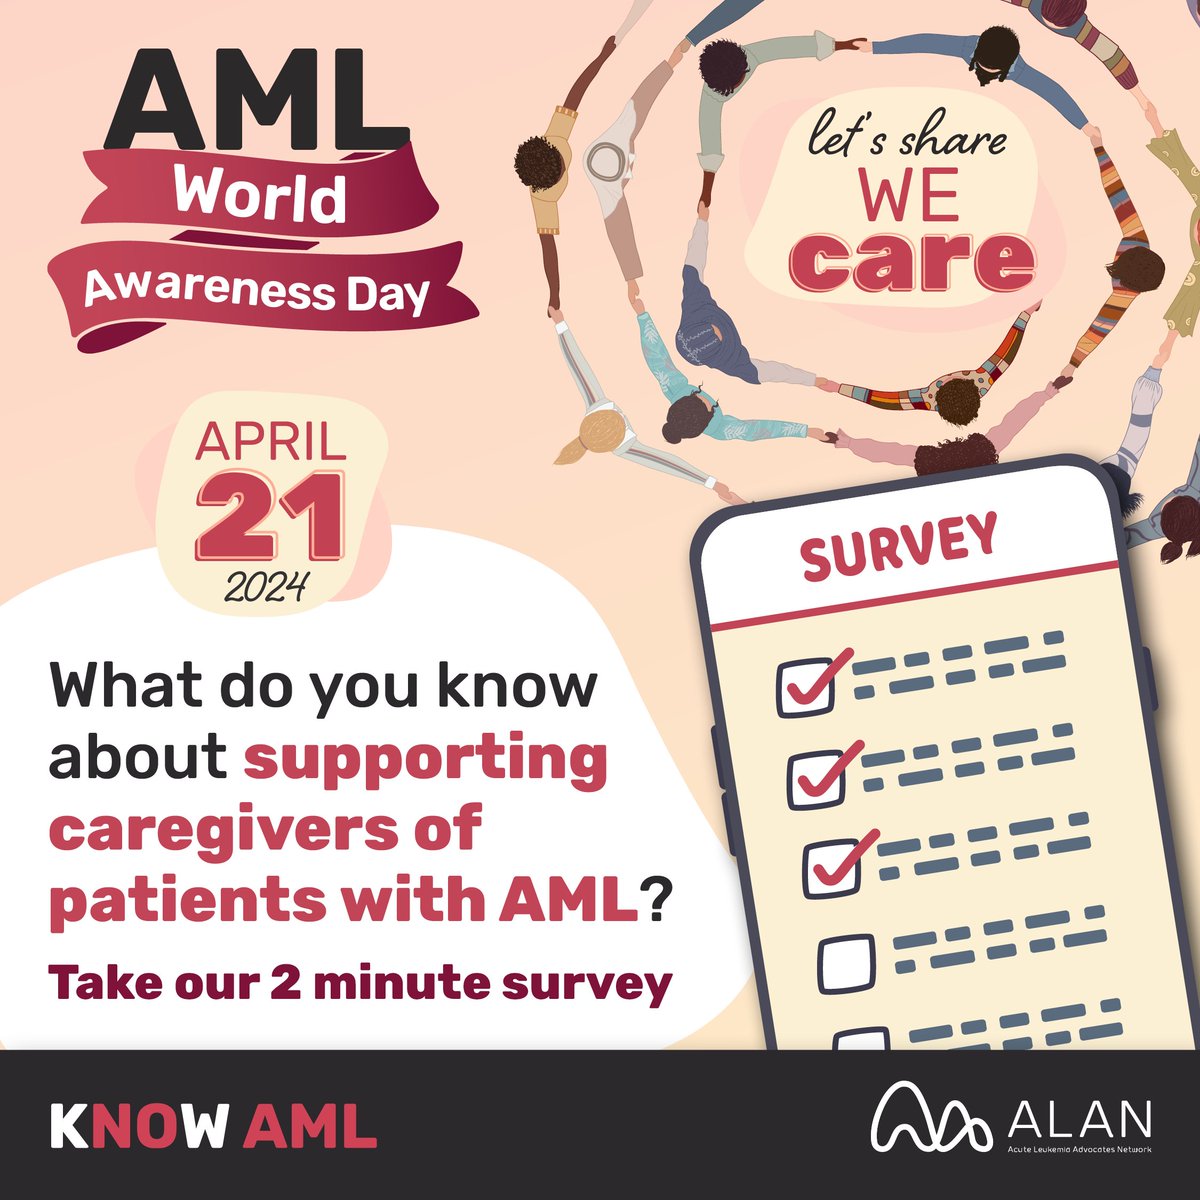 Are you aware of this year’s #AMLWorldAwarenessDay theme? We’re supporting caregivers of patients with #AcuteMyeloidLeukemia. Take our short survey! 

Survey: loom.ly/whPmzSc 

#KnowAML #leukemia #BloodCancer #cancer